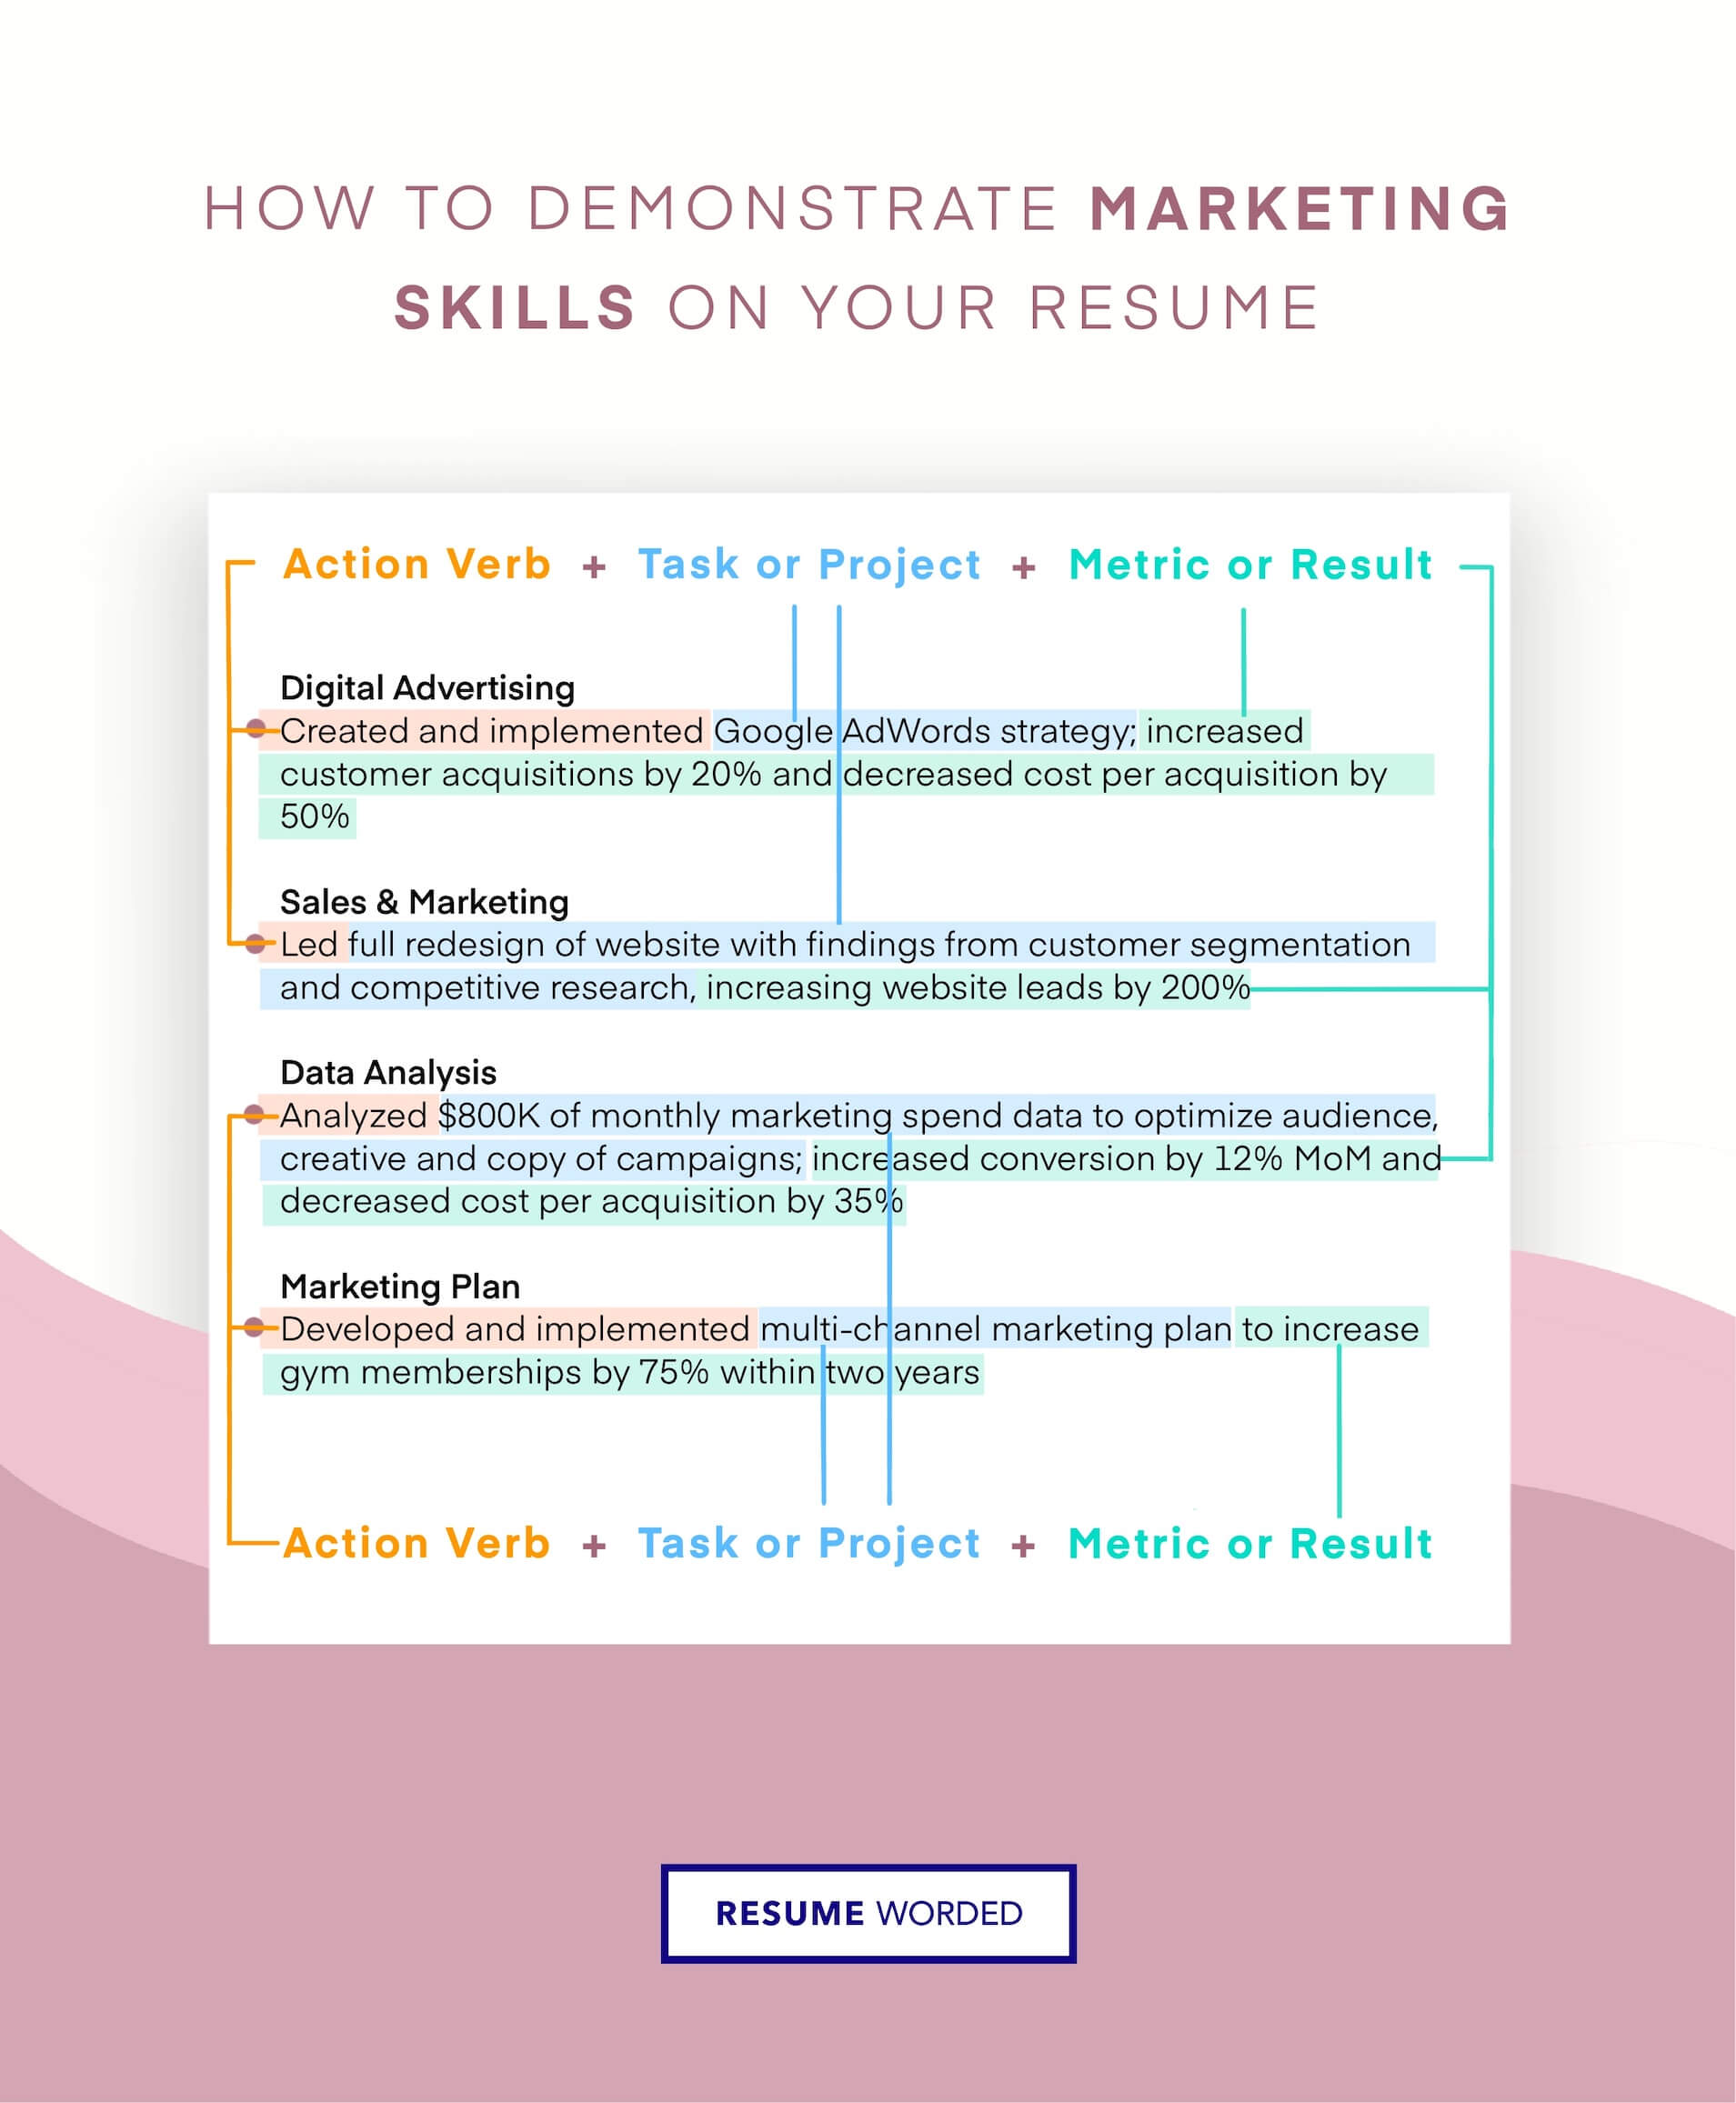 Mention the marketing analytic tools you use on your resume. - Digital Marketing Analyst Resume